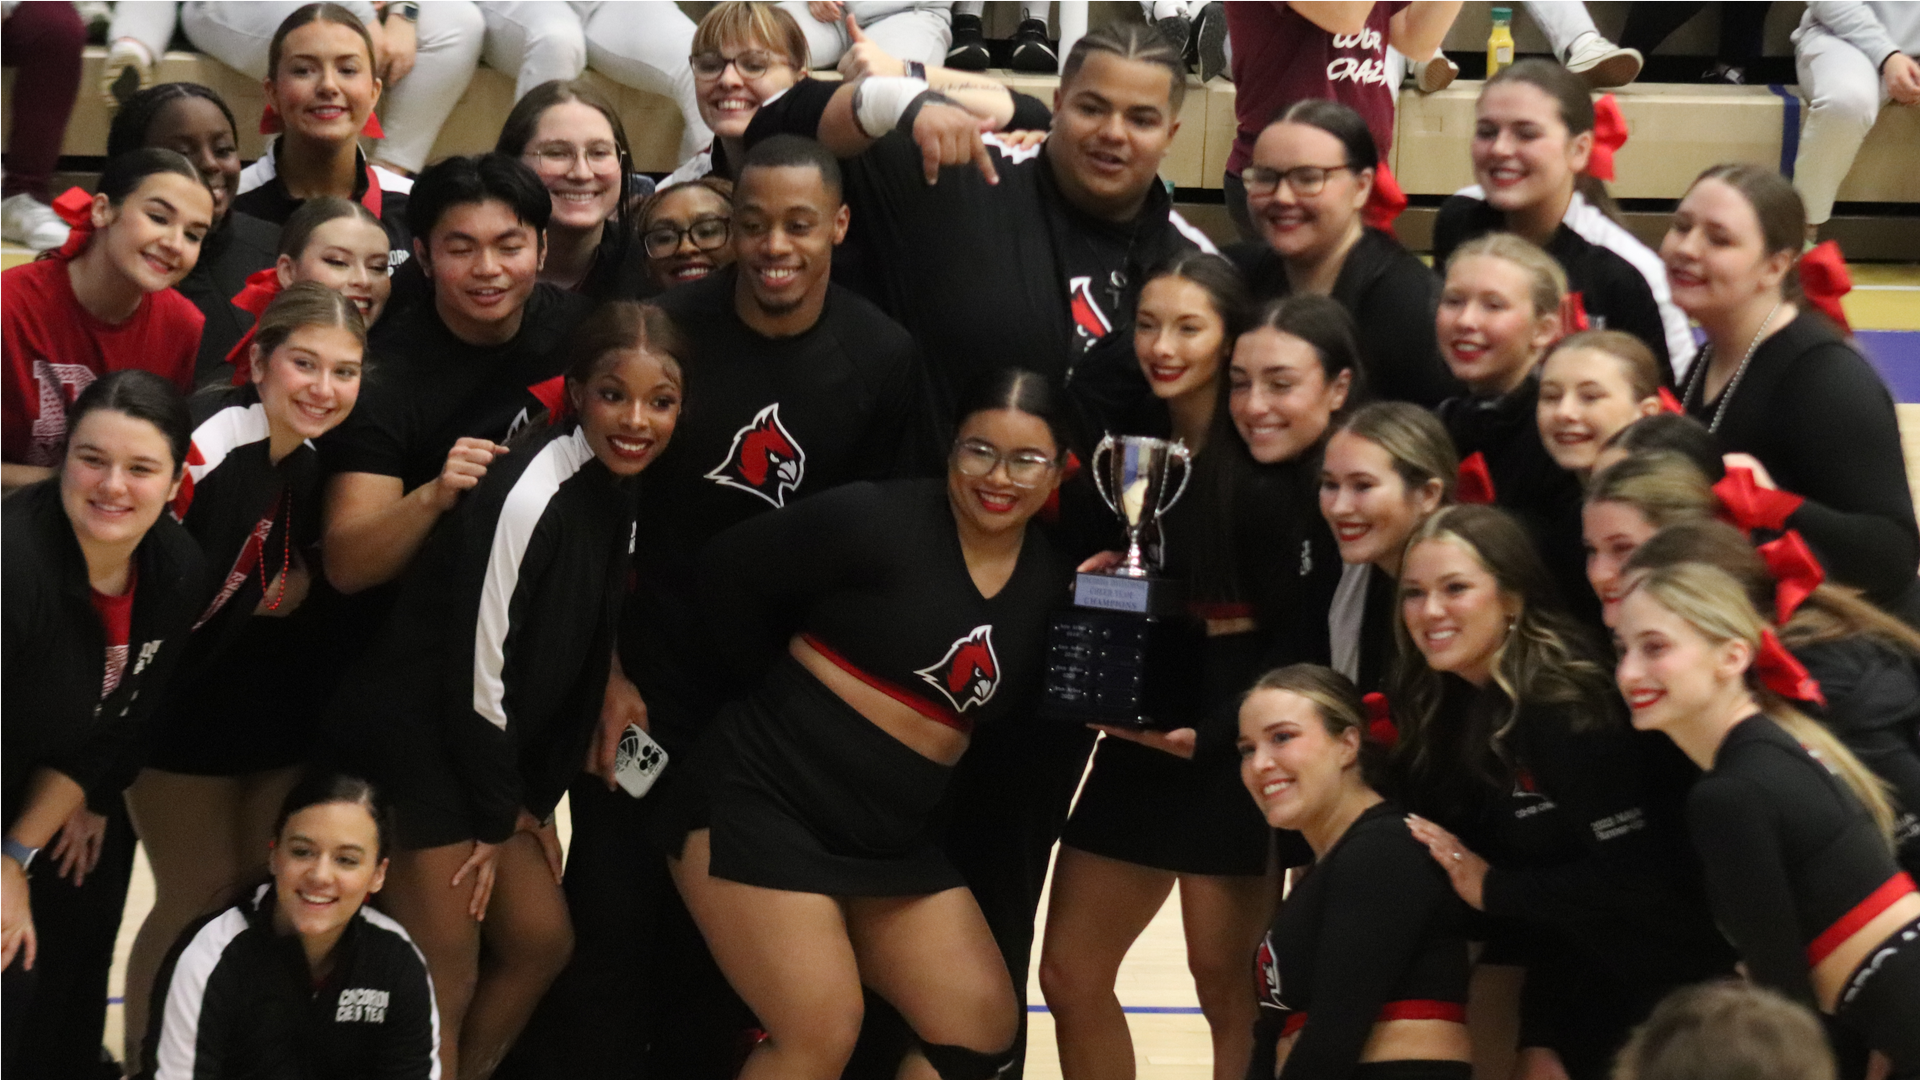 Cheer takes home their fifth straight CIT Championship